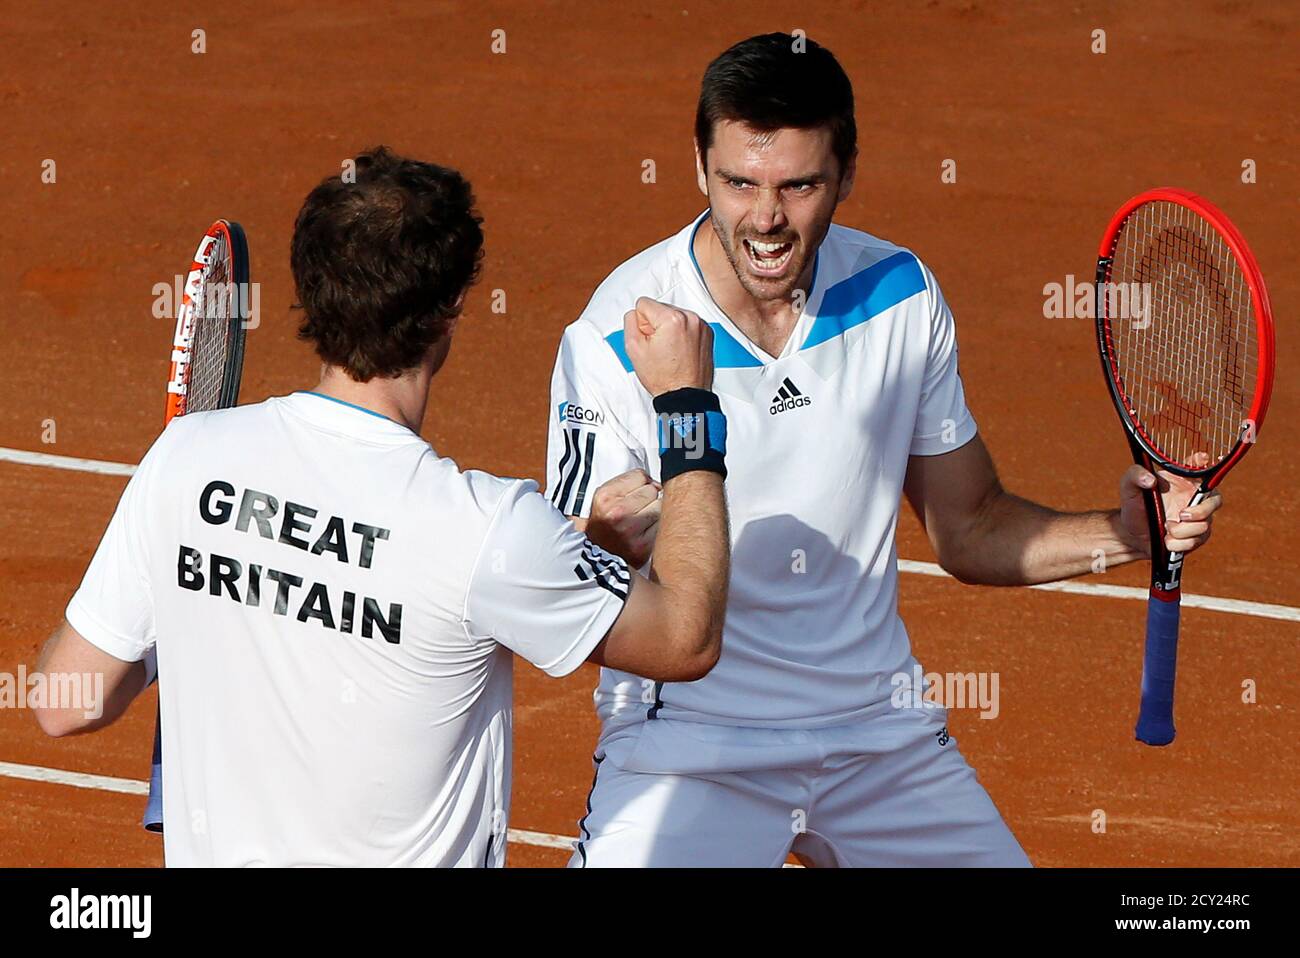 Britain's Andy Murray (L) and his teammate Colin Fleming celebrate after  winning their Davis Cup quarter-final doubles tennis match against Italy's  Fabio Fognini and Simone Bolelli in Naples April 5, 2014. REUTERS/Alessandro